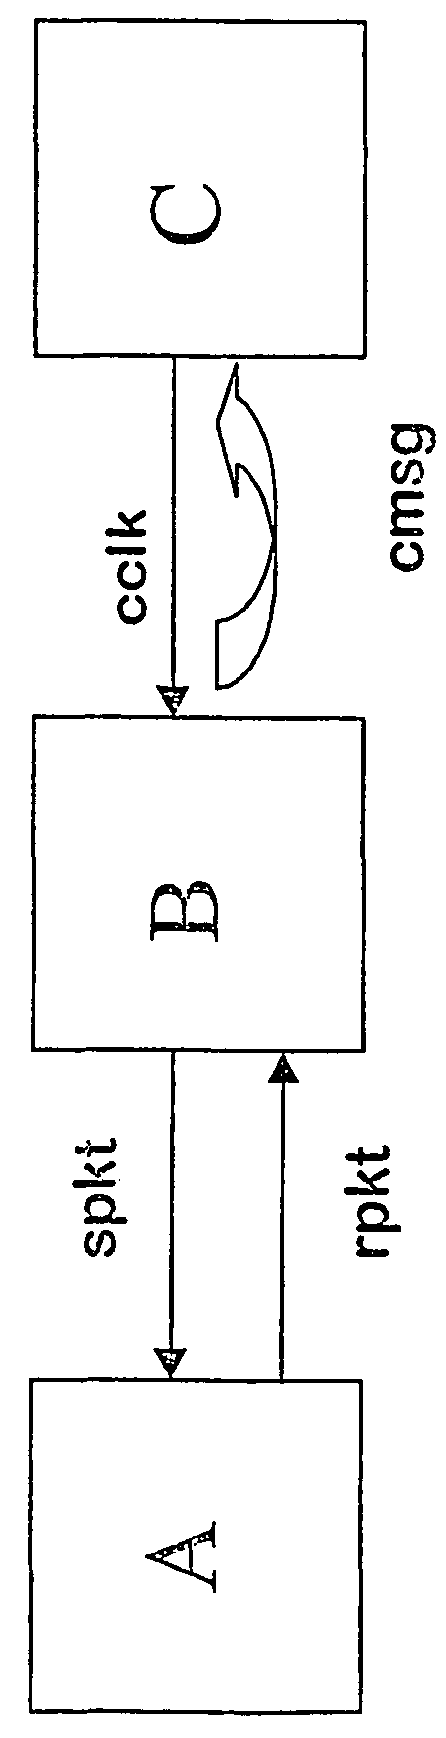 Method for synchronizing a first clock to a second clock, processing unit and synchronization system